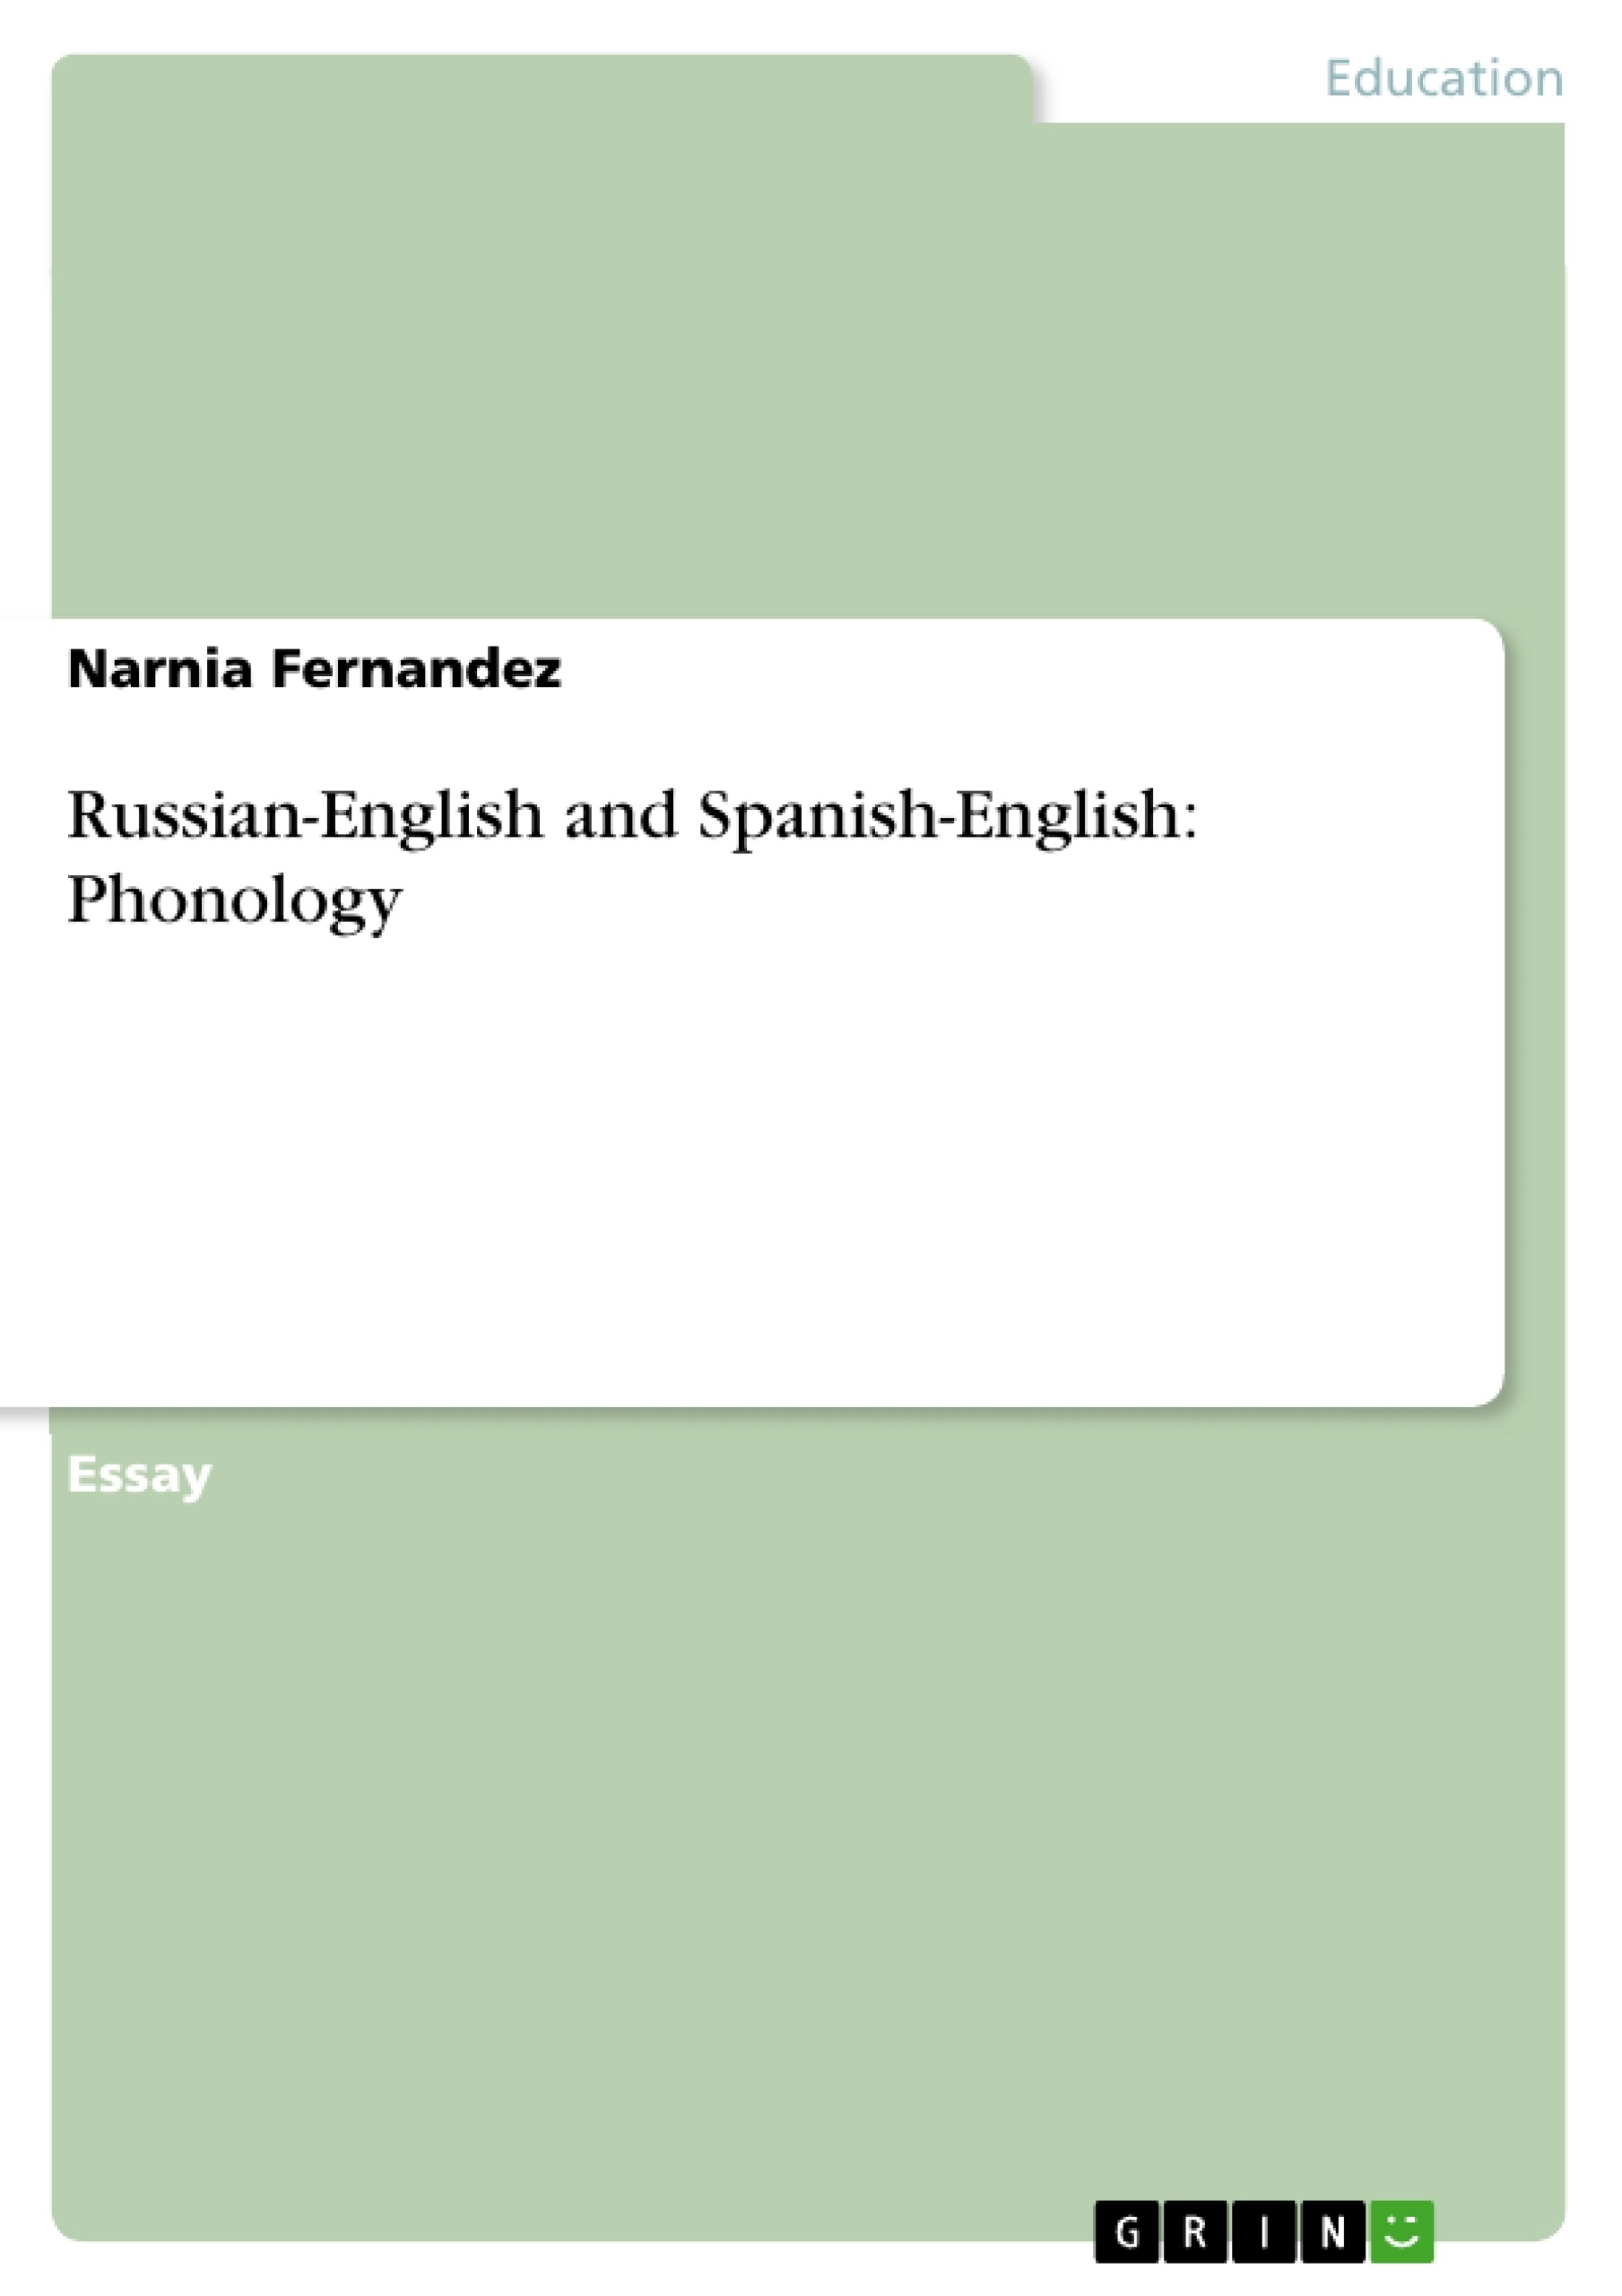 Title: Russian-English and Spanish-English: Phonology